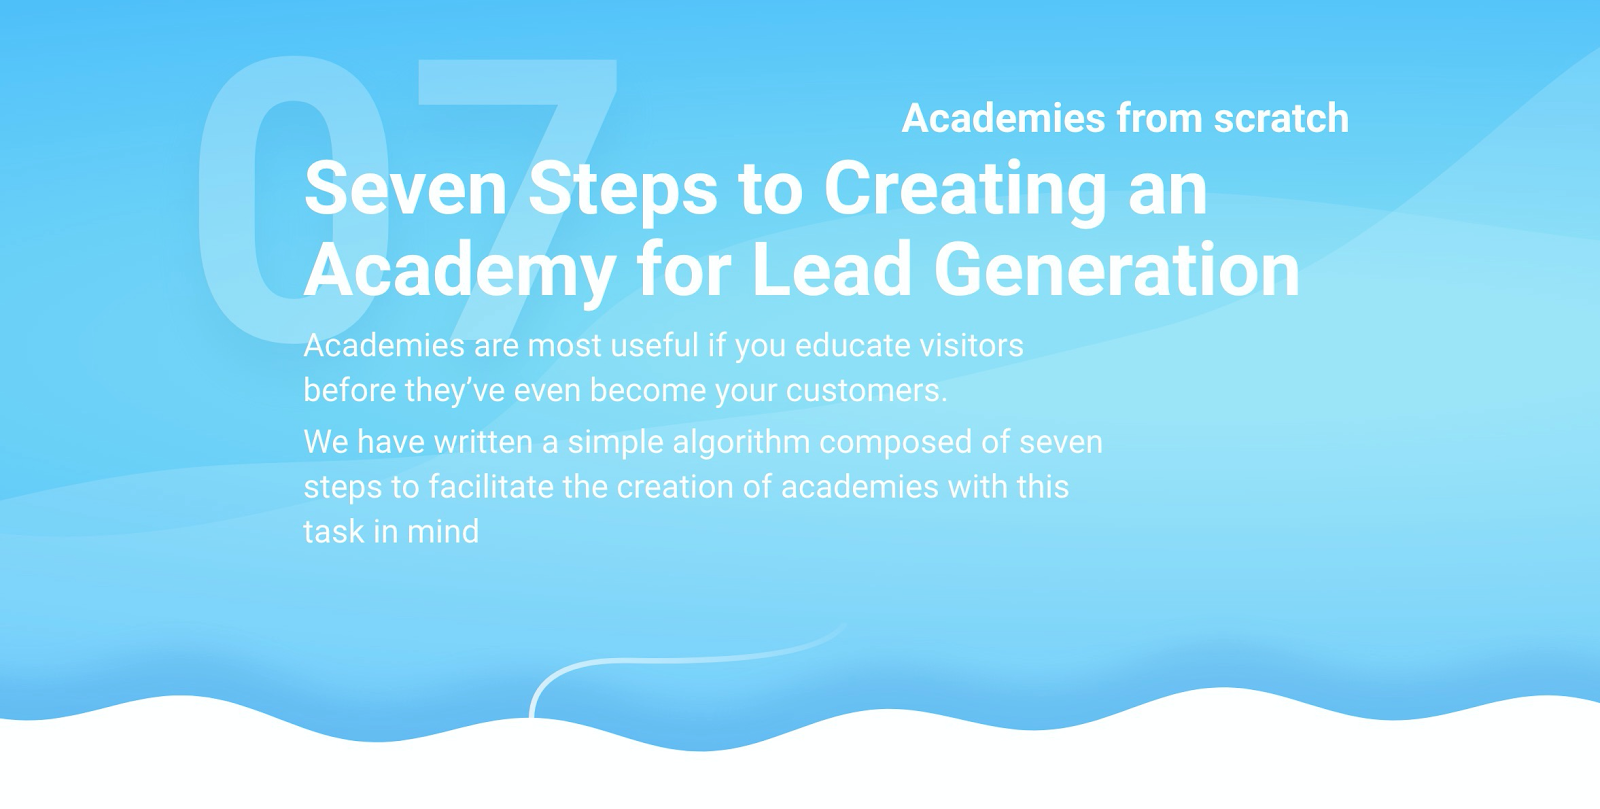 Academies from scratch